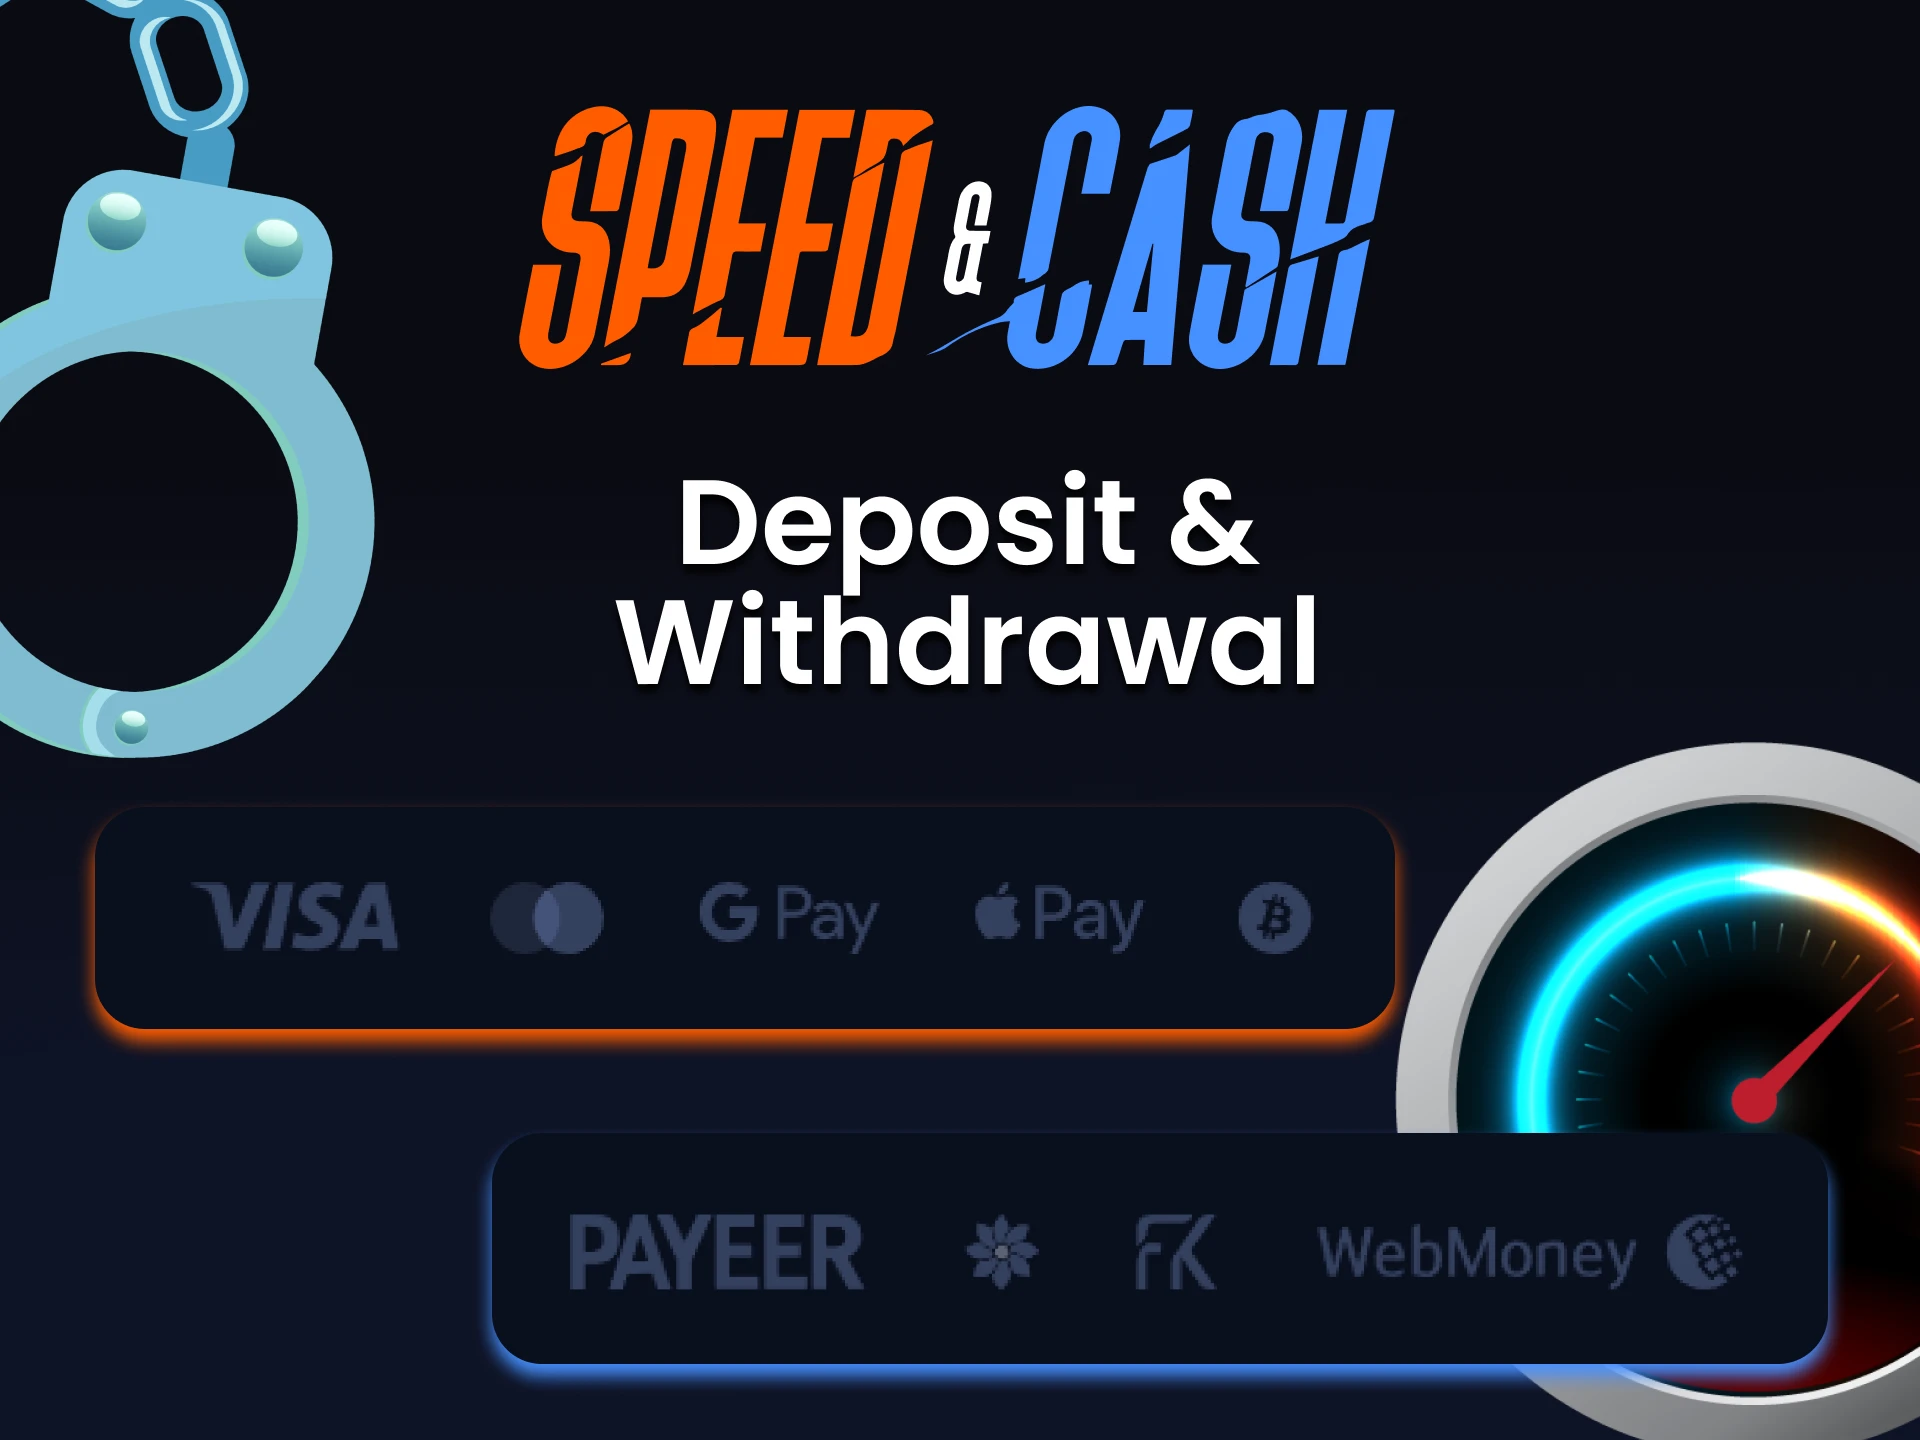 Choose a convenient way to play Speed&Cash.